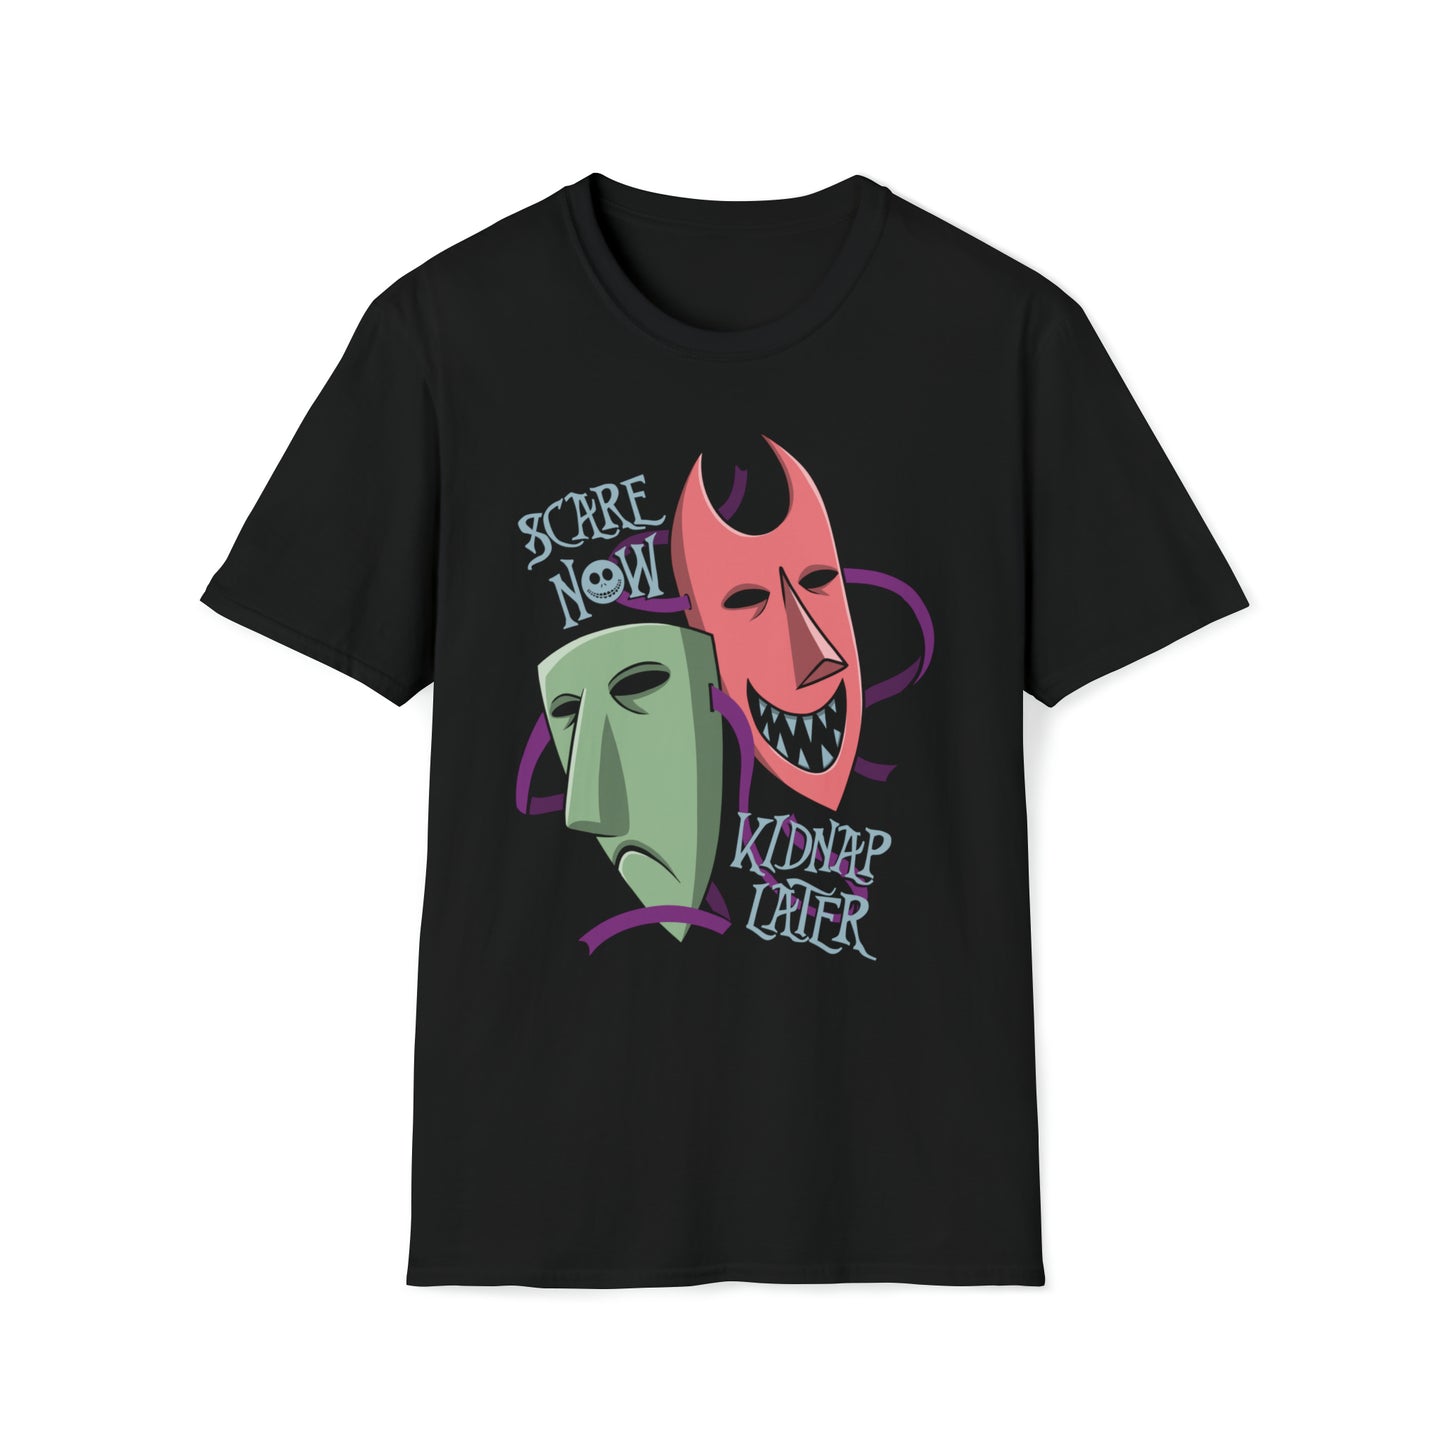 Scare Now, Kidnap Later t-shirt